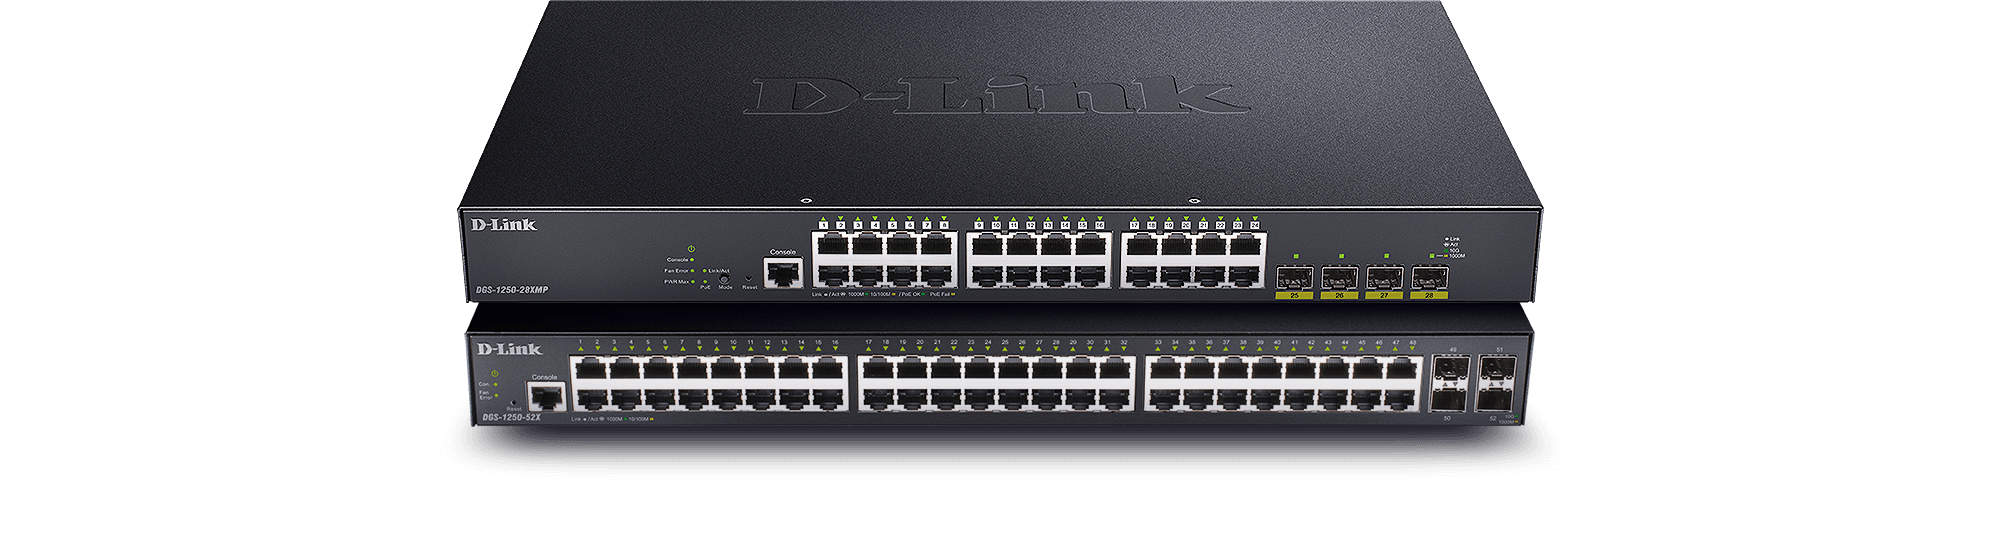 DGS-1250 28-port and 52-port switches